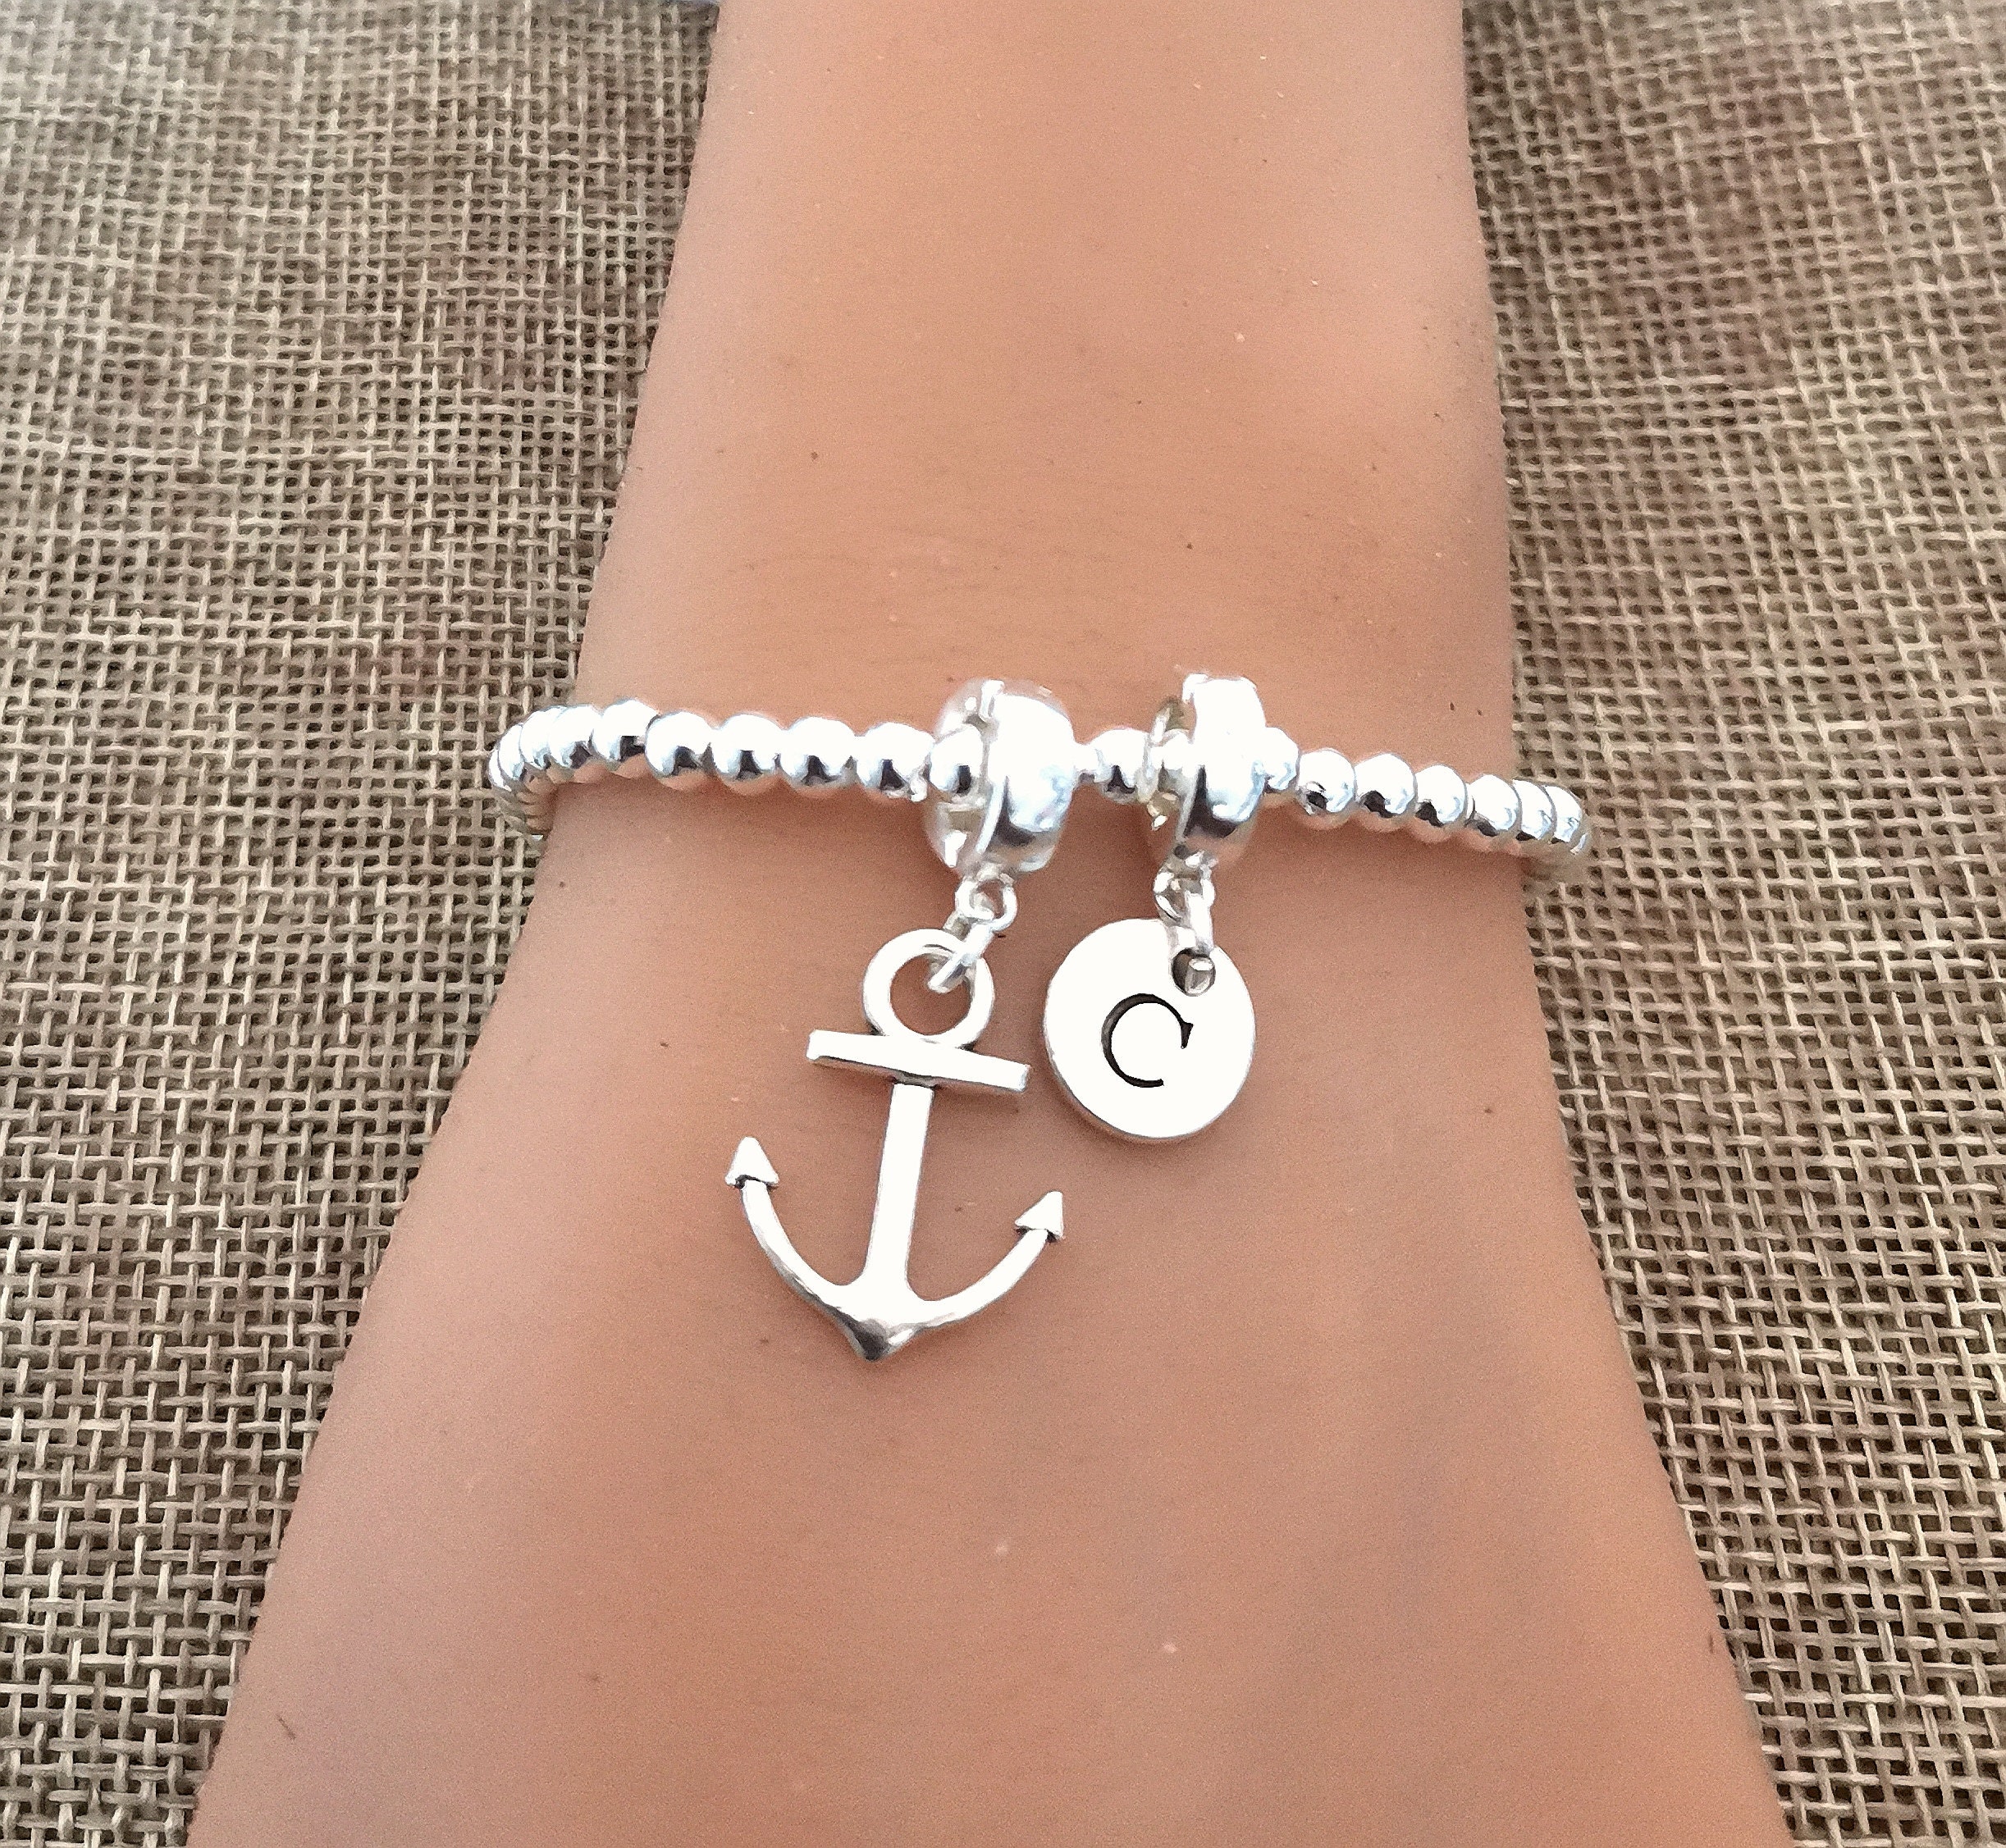 Bracelet Silver Anchor Bracelet Dainty Turquoise Cord Bracelet Anchor  Charm Gift for her Minimalist Jewelry Nautical Teal  Amazonca  Clothing Shoes  Accessories